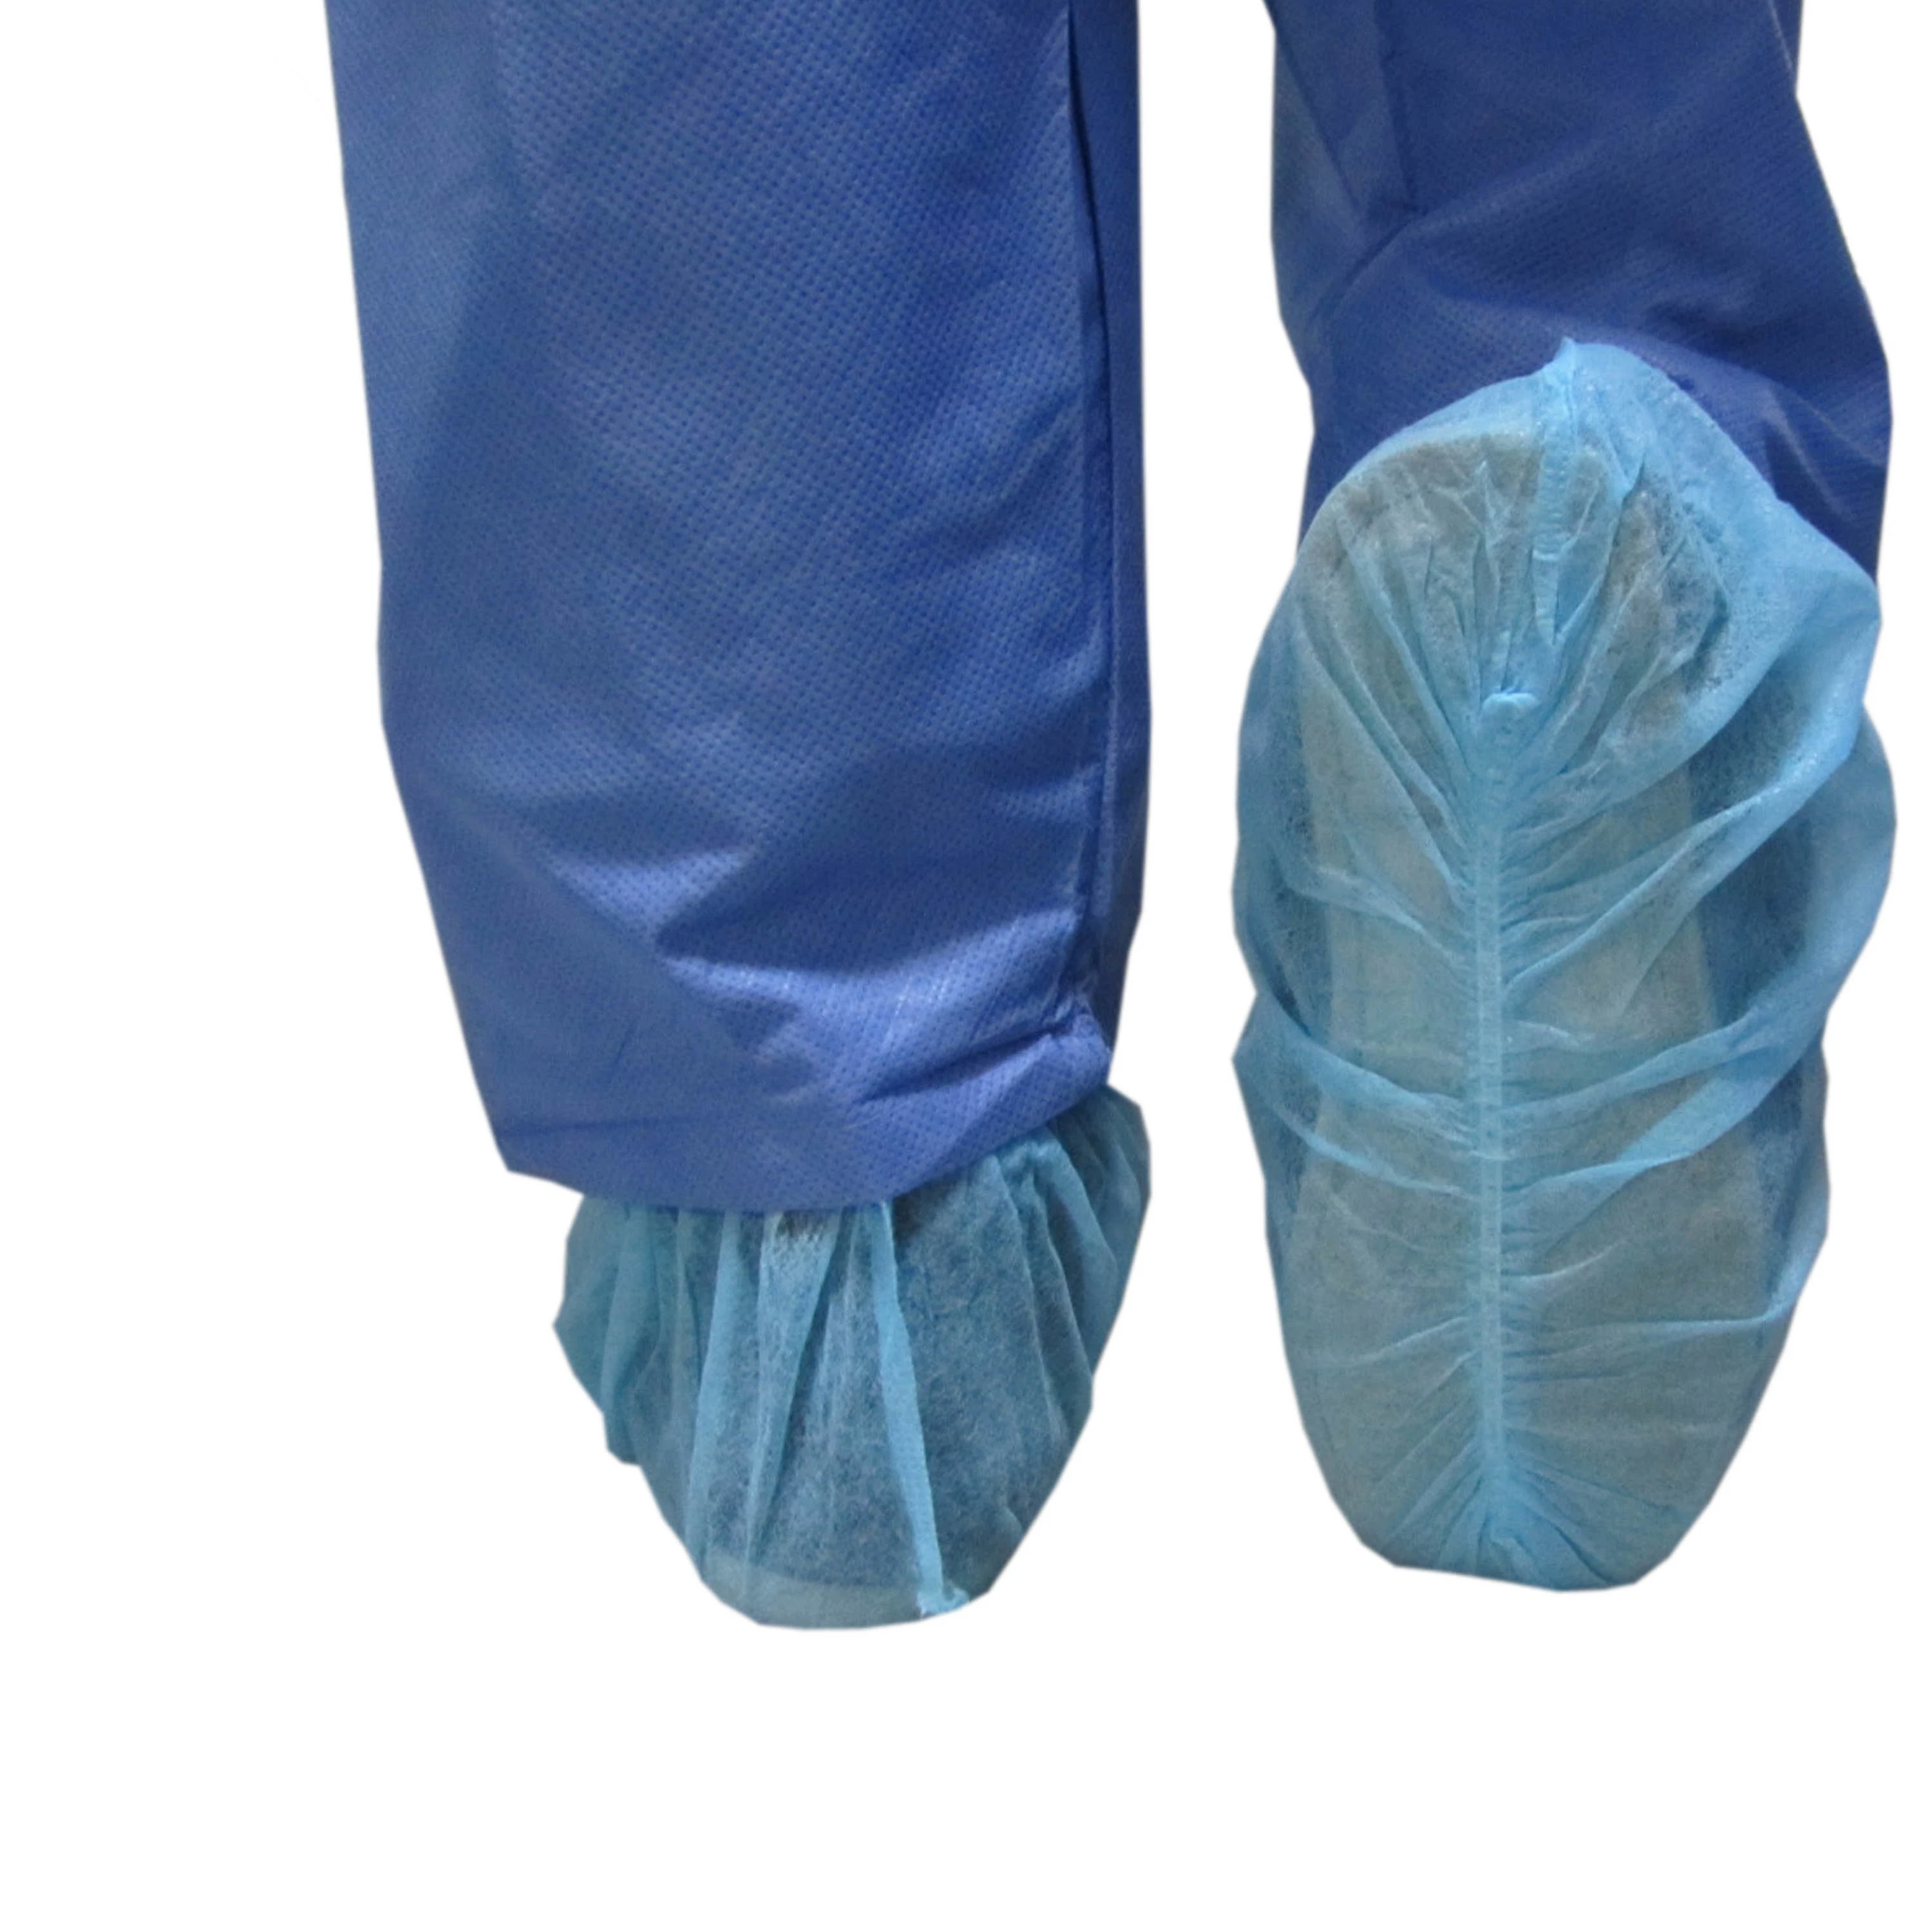 Disposable Nonwoven/SBPP Shoes Cover with Antislip